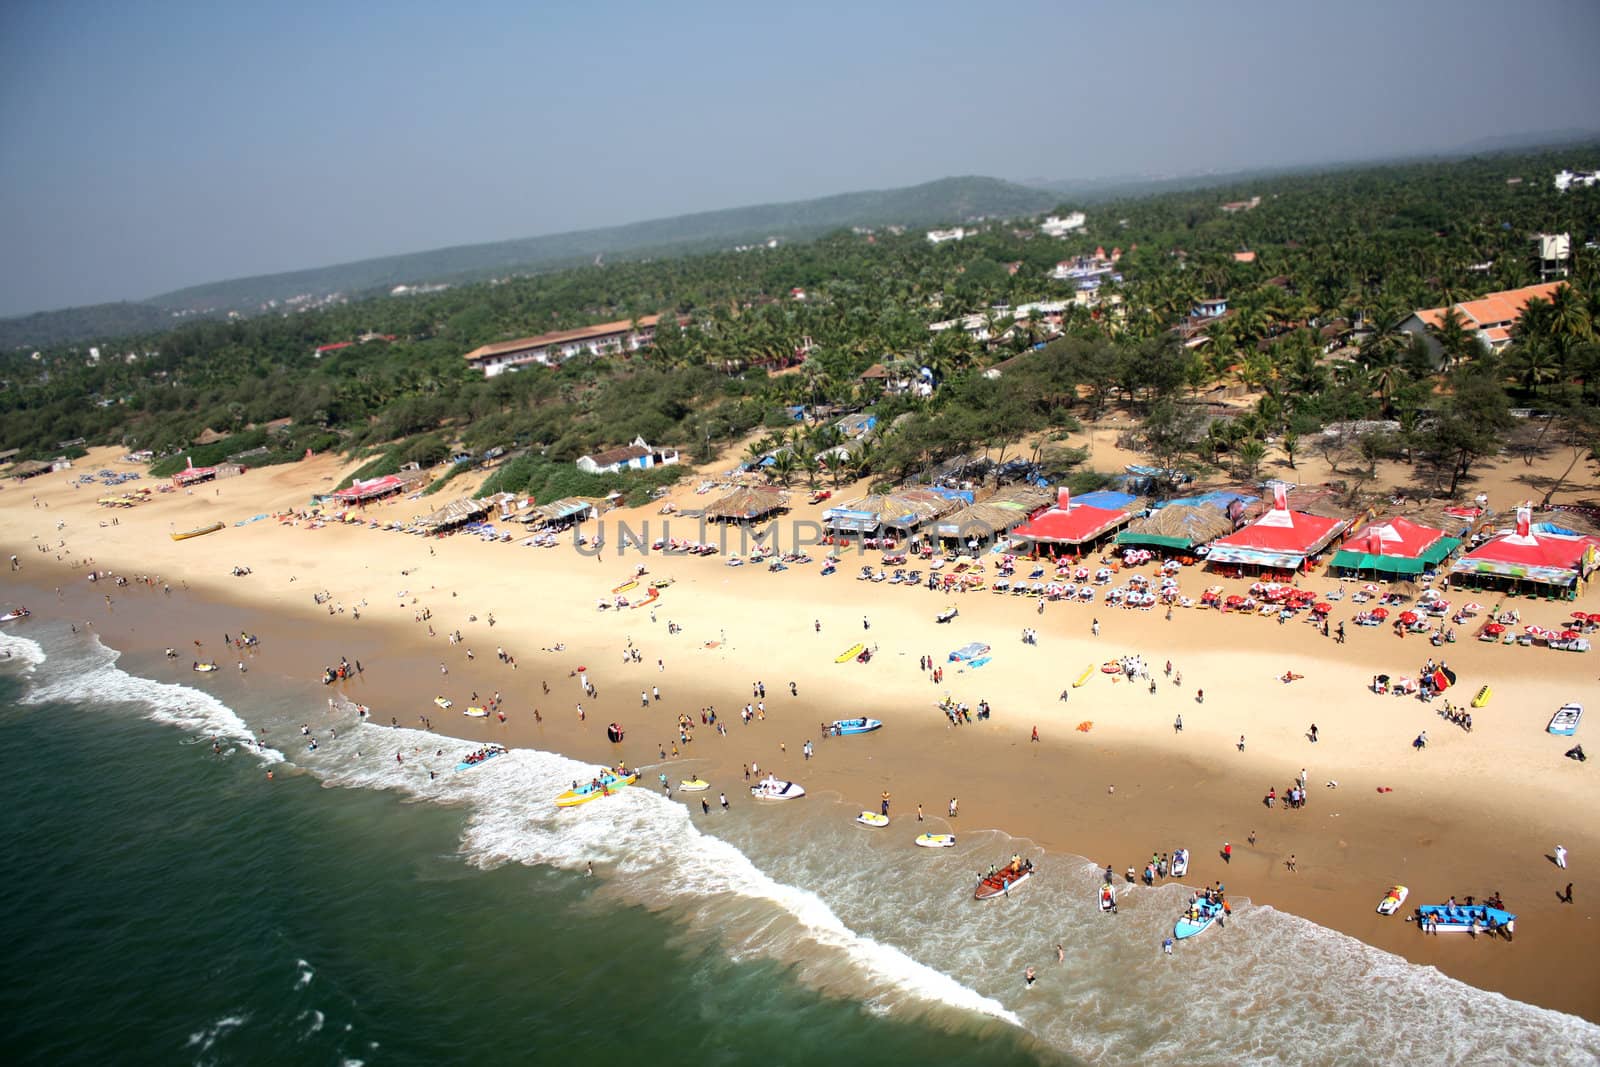 An aerial view of a crowded beach in Goa, India.